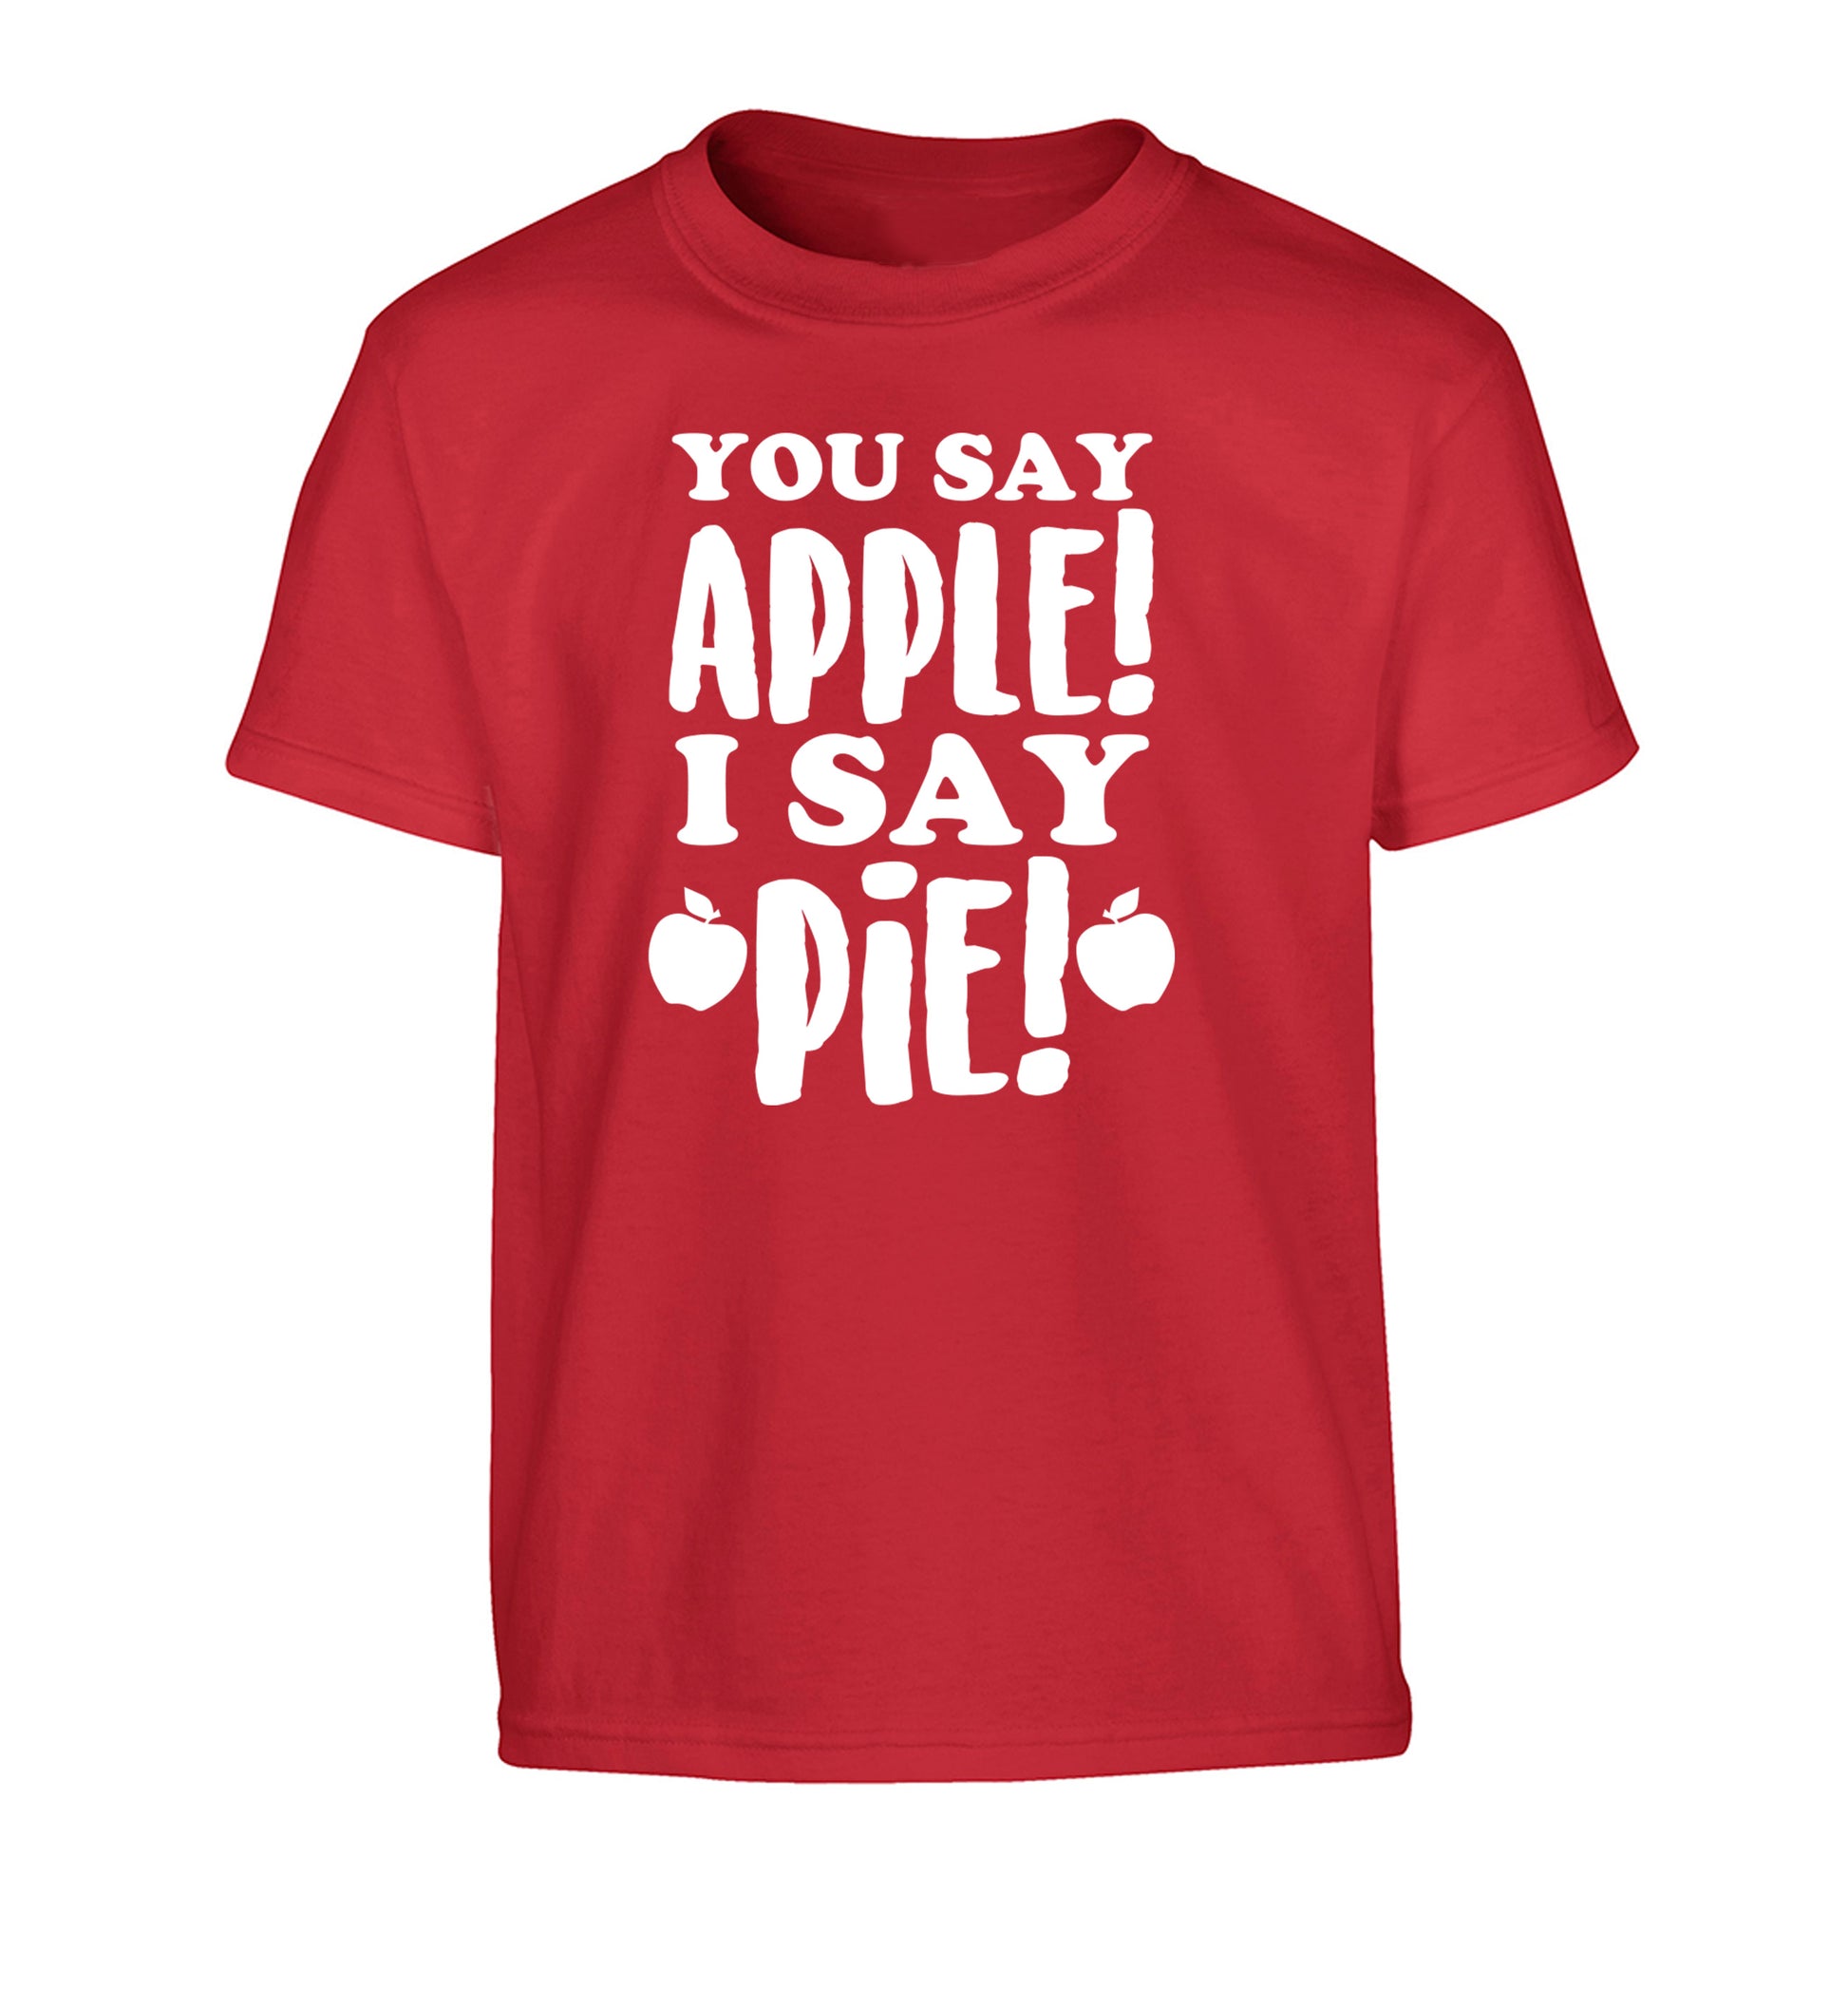 You say apple I say pie! Children's red Tshirt 12-14 Years